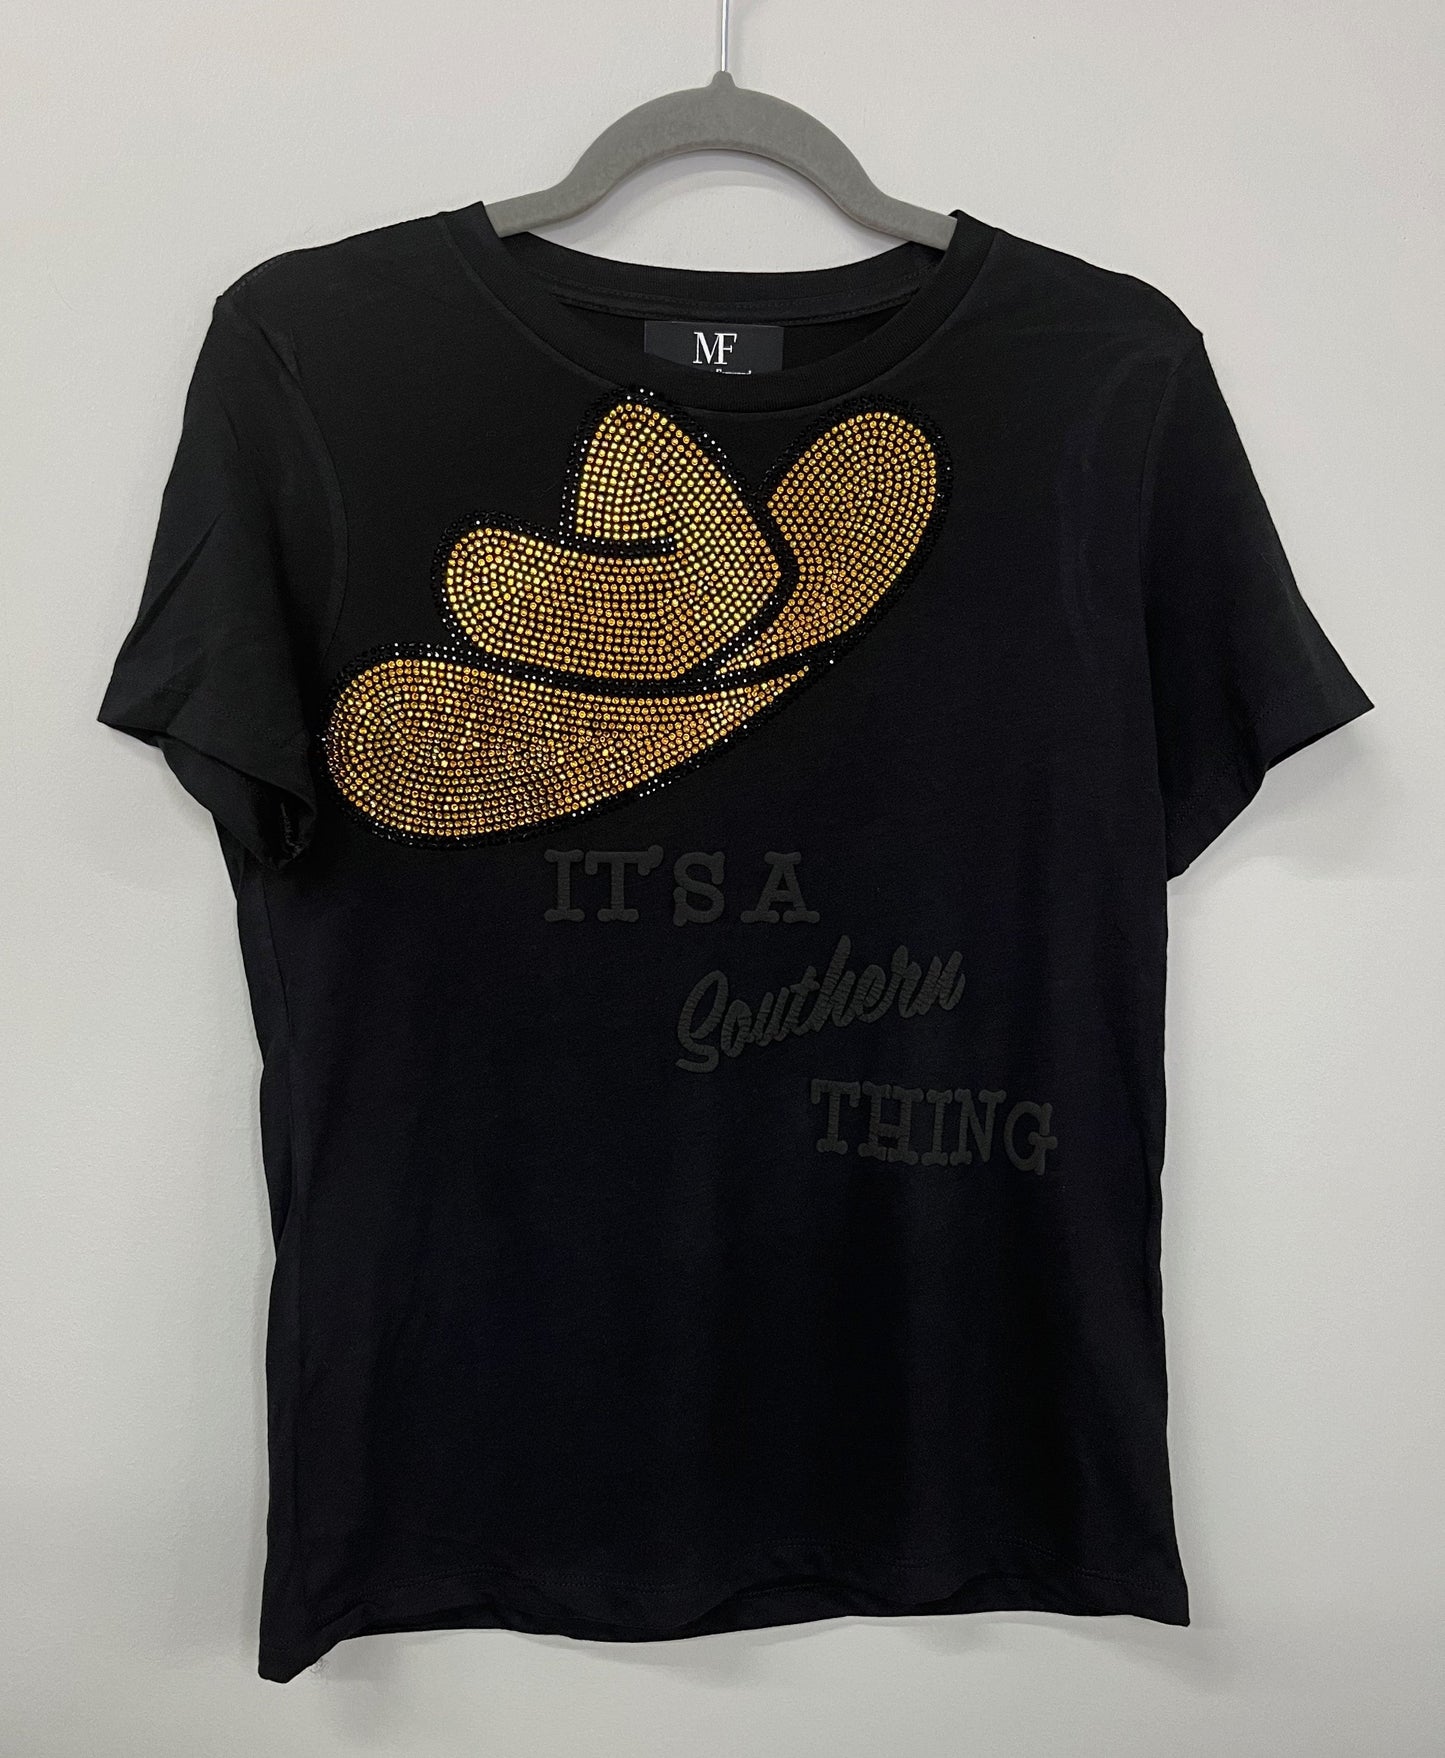 T-Shirt, Short Sleeve Black, It's a Southern Thing w/ Hat